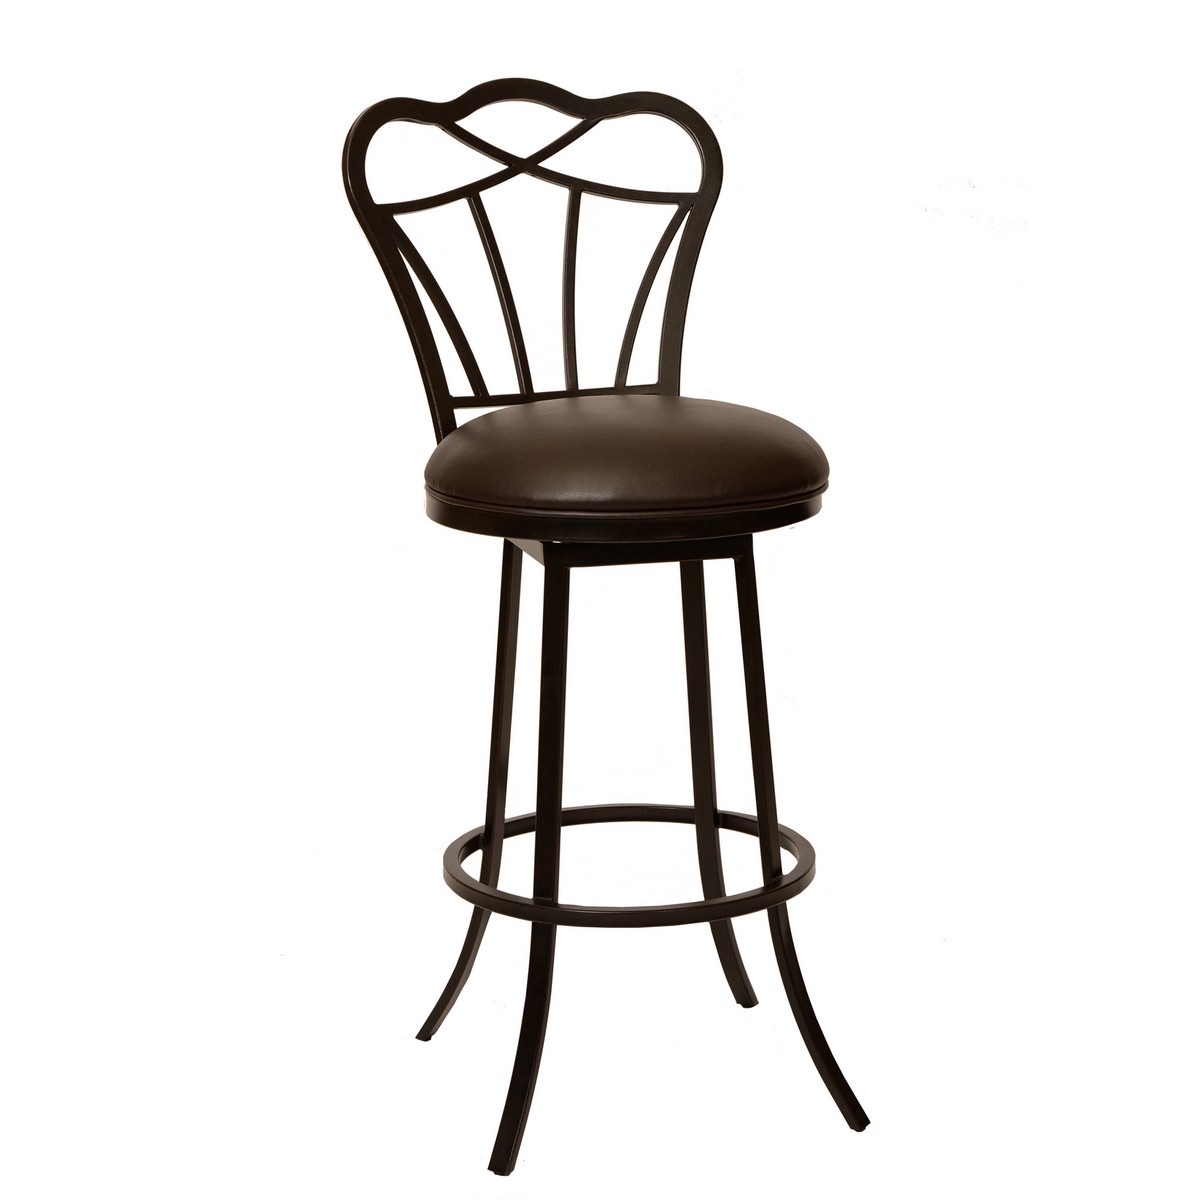 Armen Living Galvin 30-inch Transitional Modern Barstool In Coffee and Auburn Bay Metal